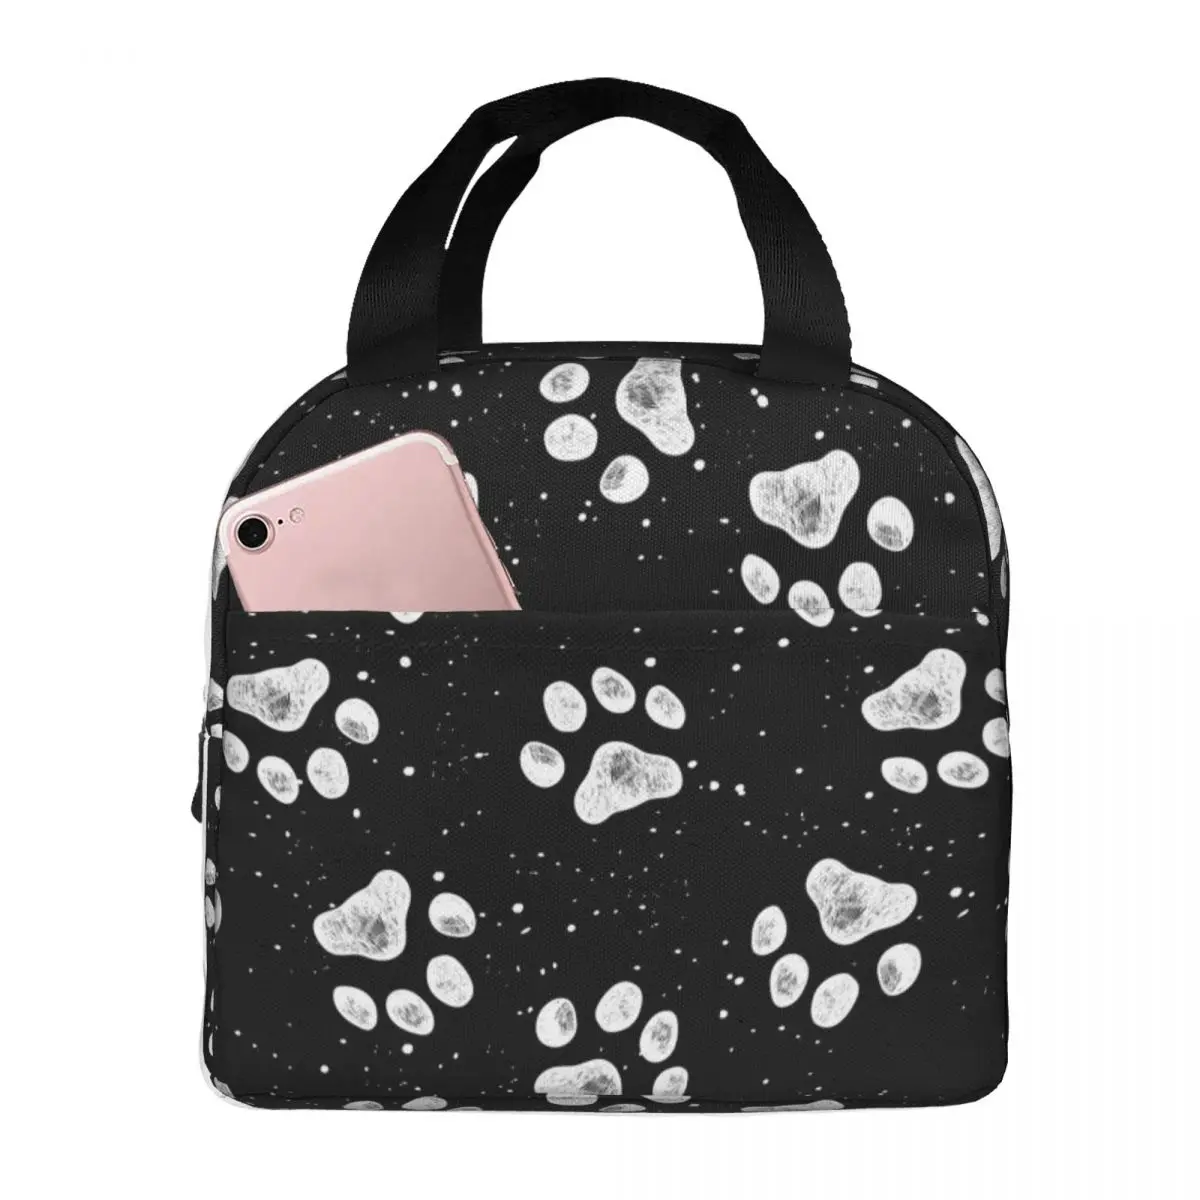 Lunch Bags for Men Women Cute Animal Paw Pattern Insulated Cooler Waterproof Picnic Canvas Lunch Box Food Storage Bags